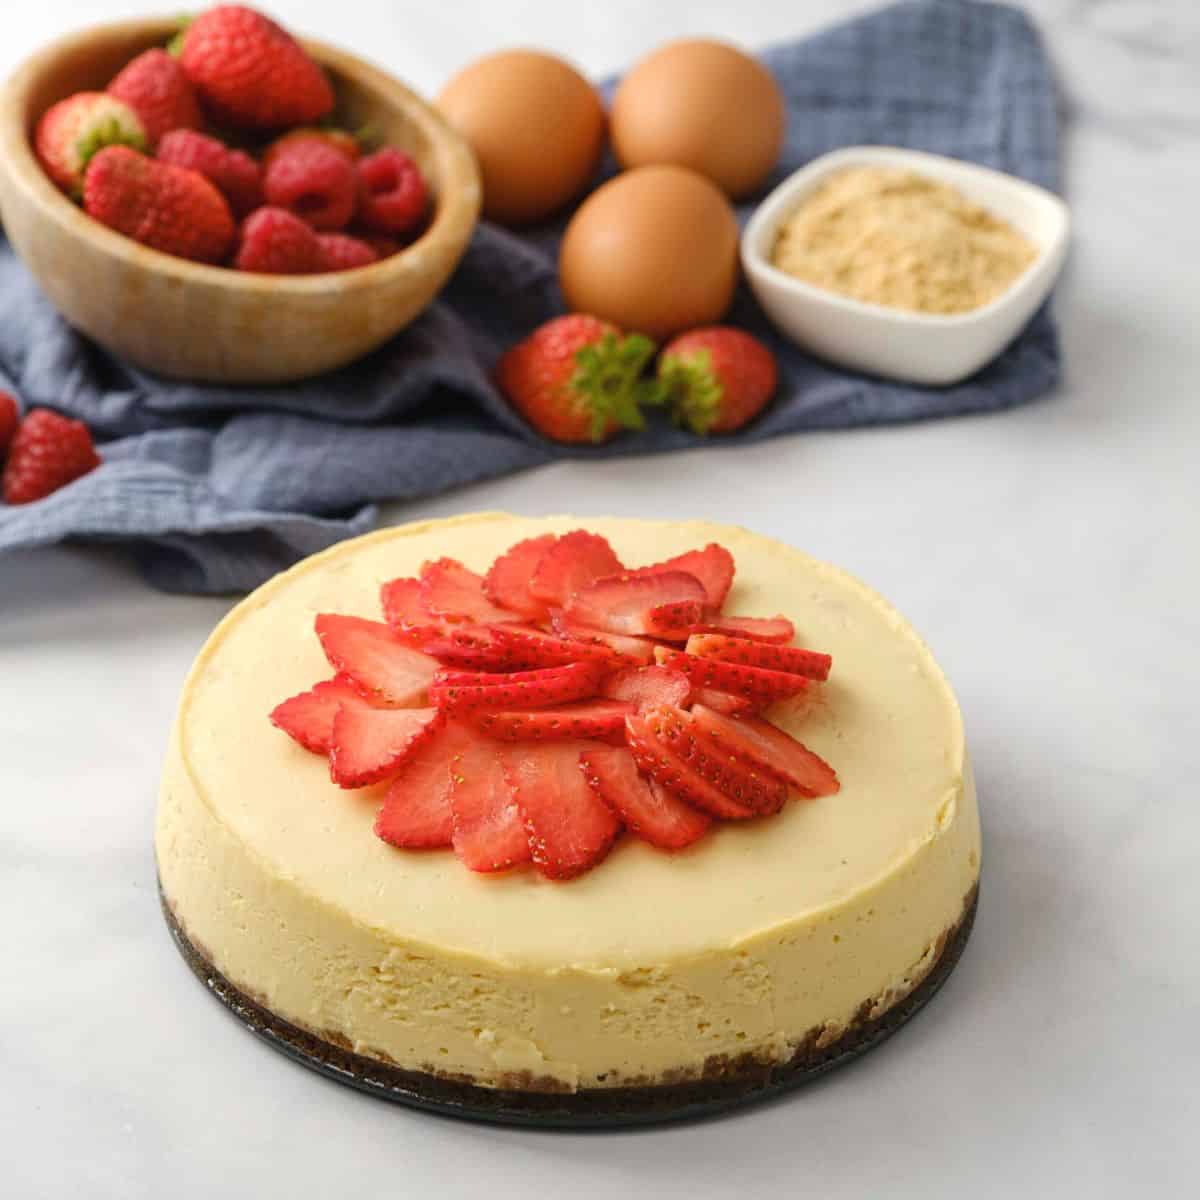 Instant Pot Cheesecake - The Best Instant Pot Cheesecake recipe